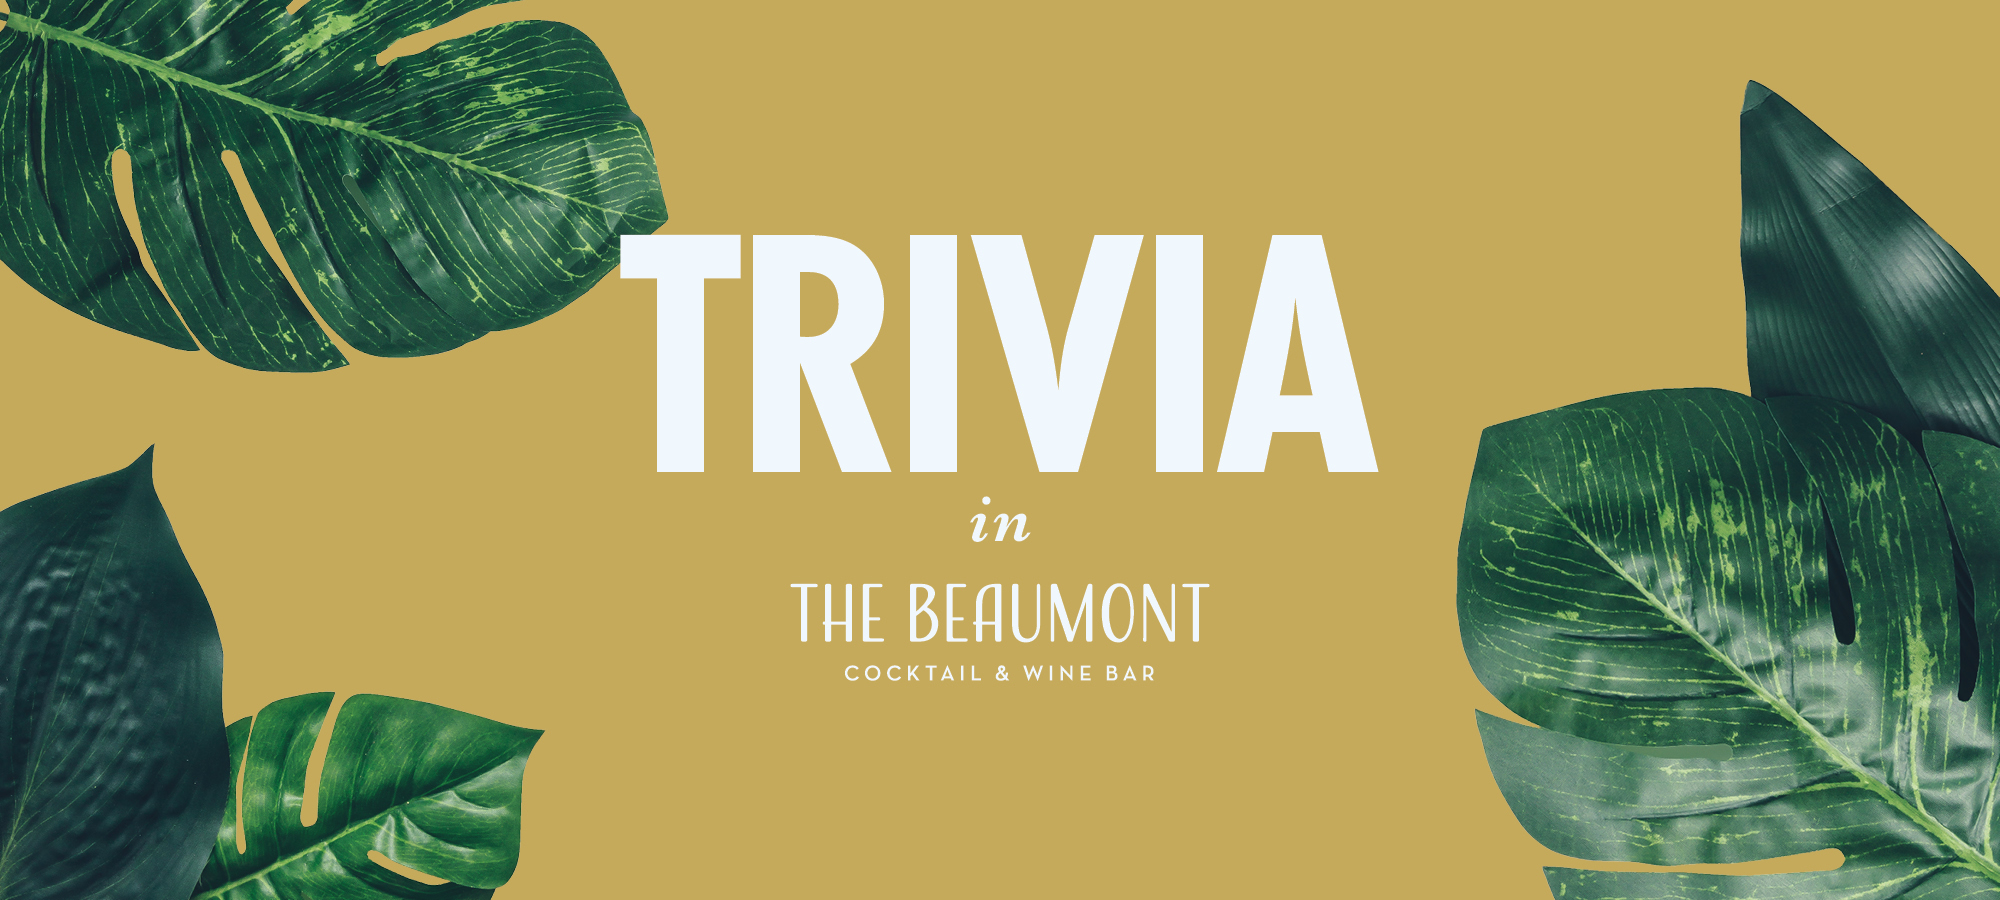 Trivia in The Beaumont – NRL Trivia